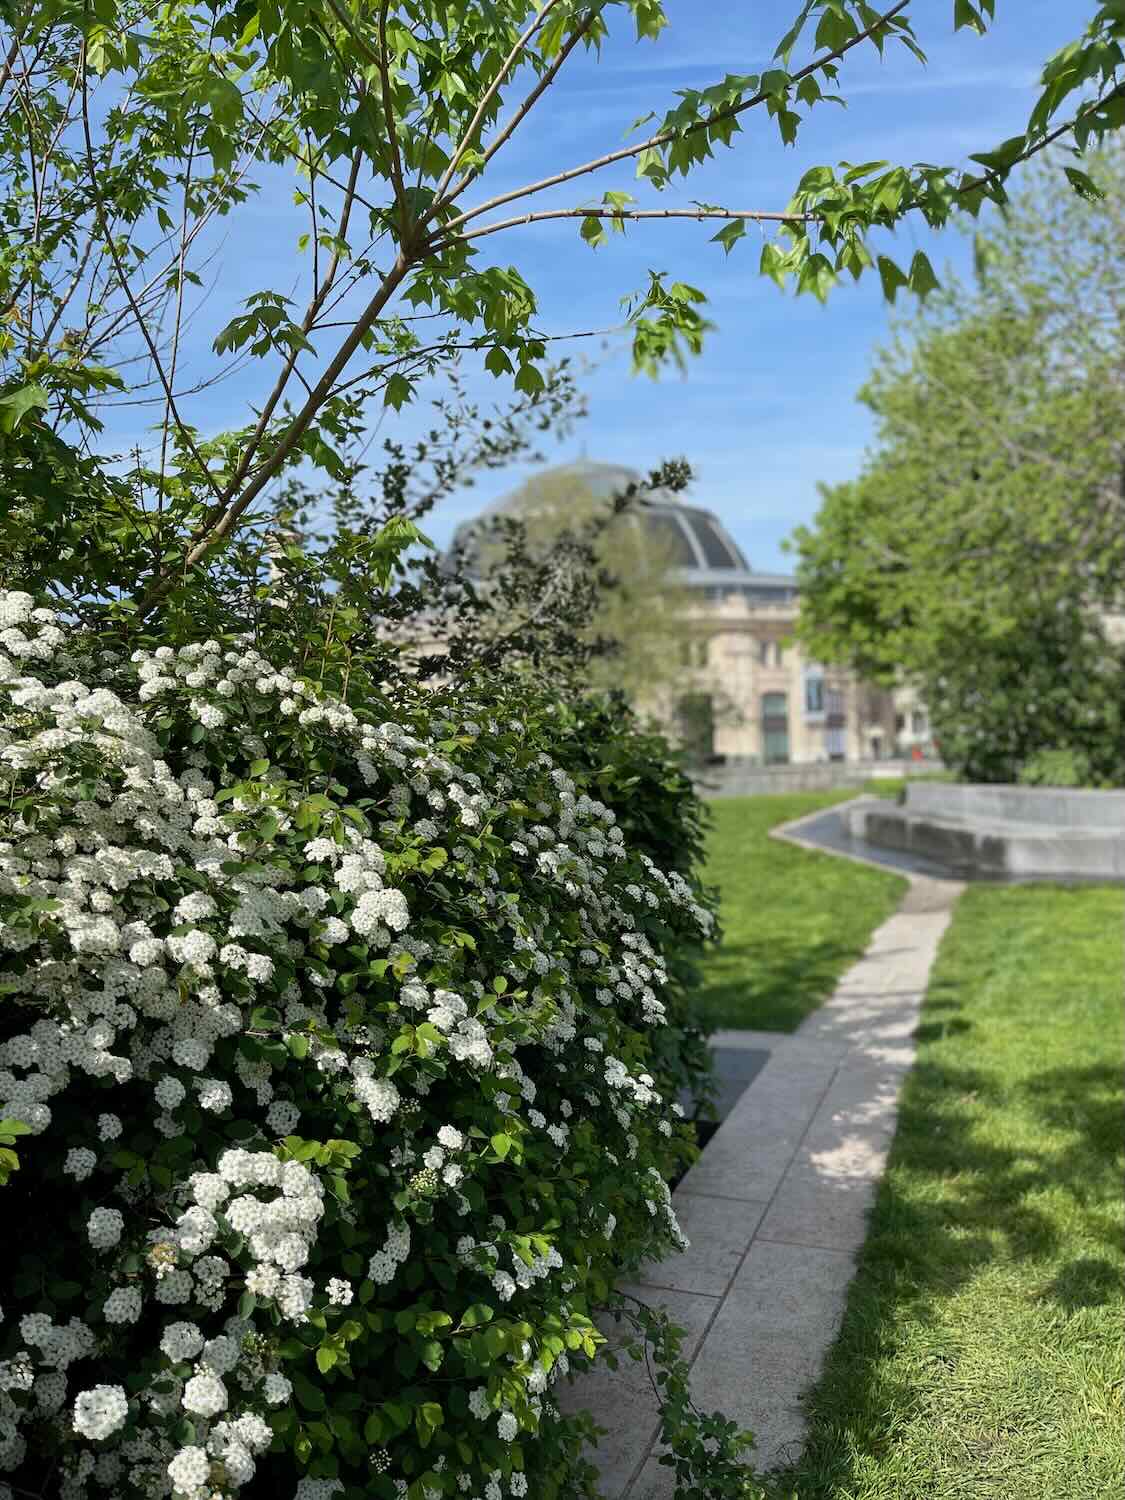 A lush, green garden in Paris with blooming white flowers and leafy trees, with a historic building partially visible in the background under a clear blue sky.